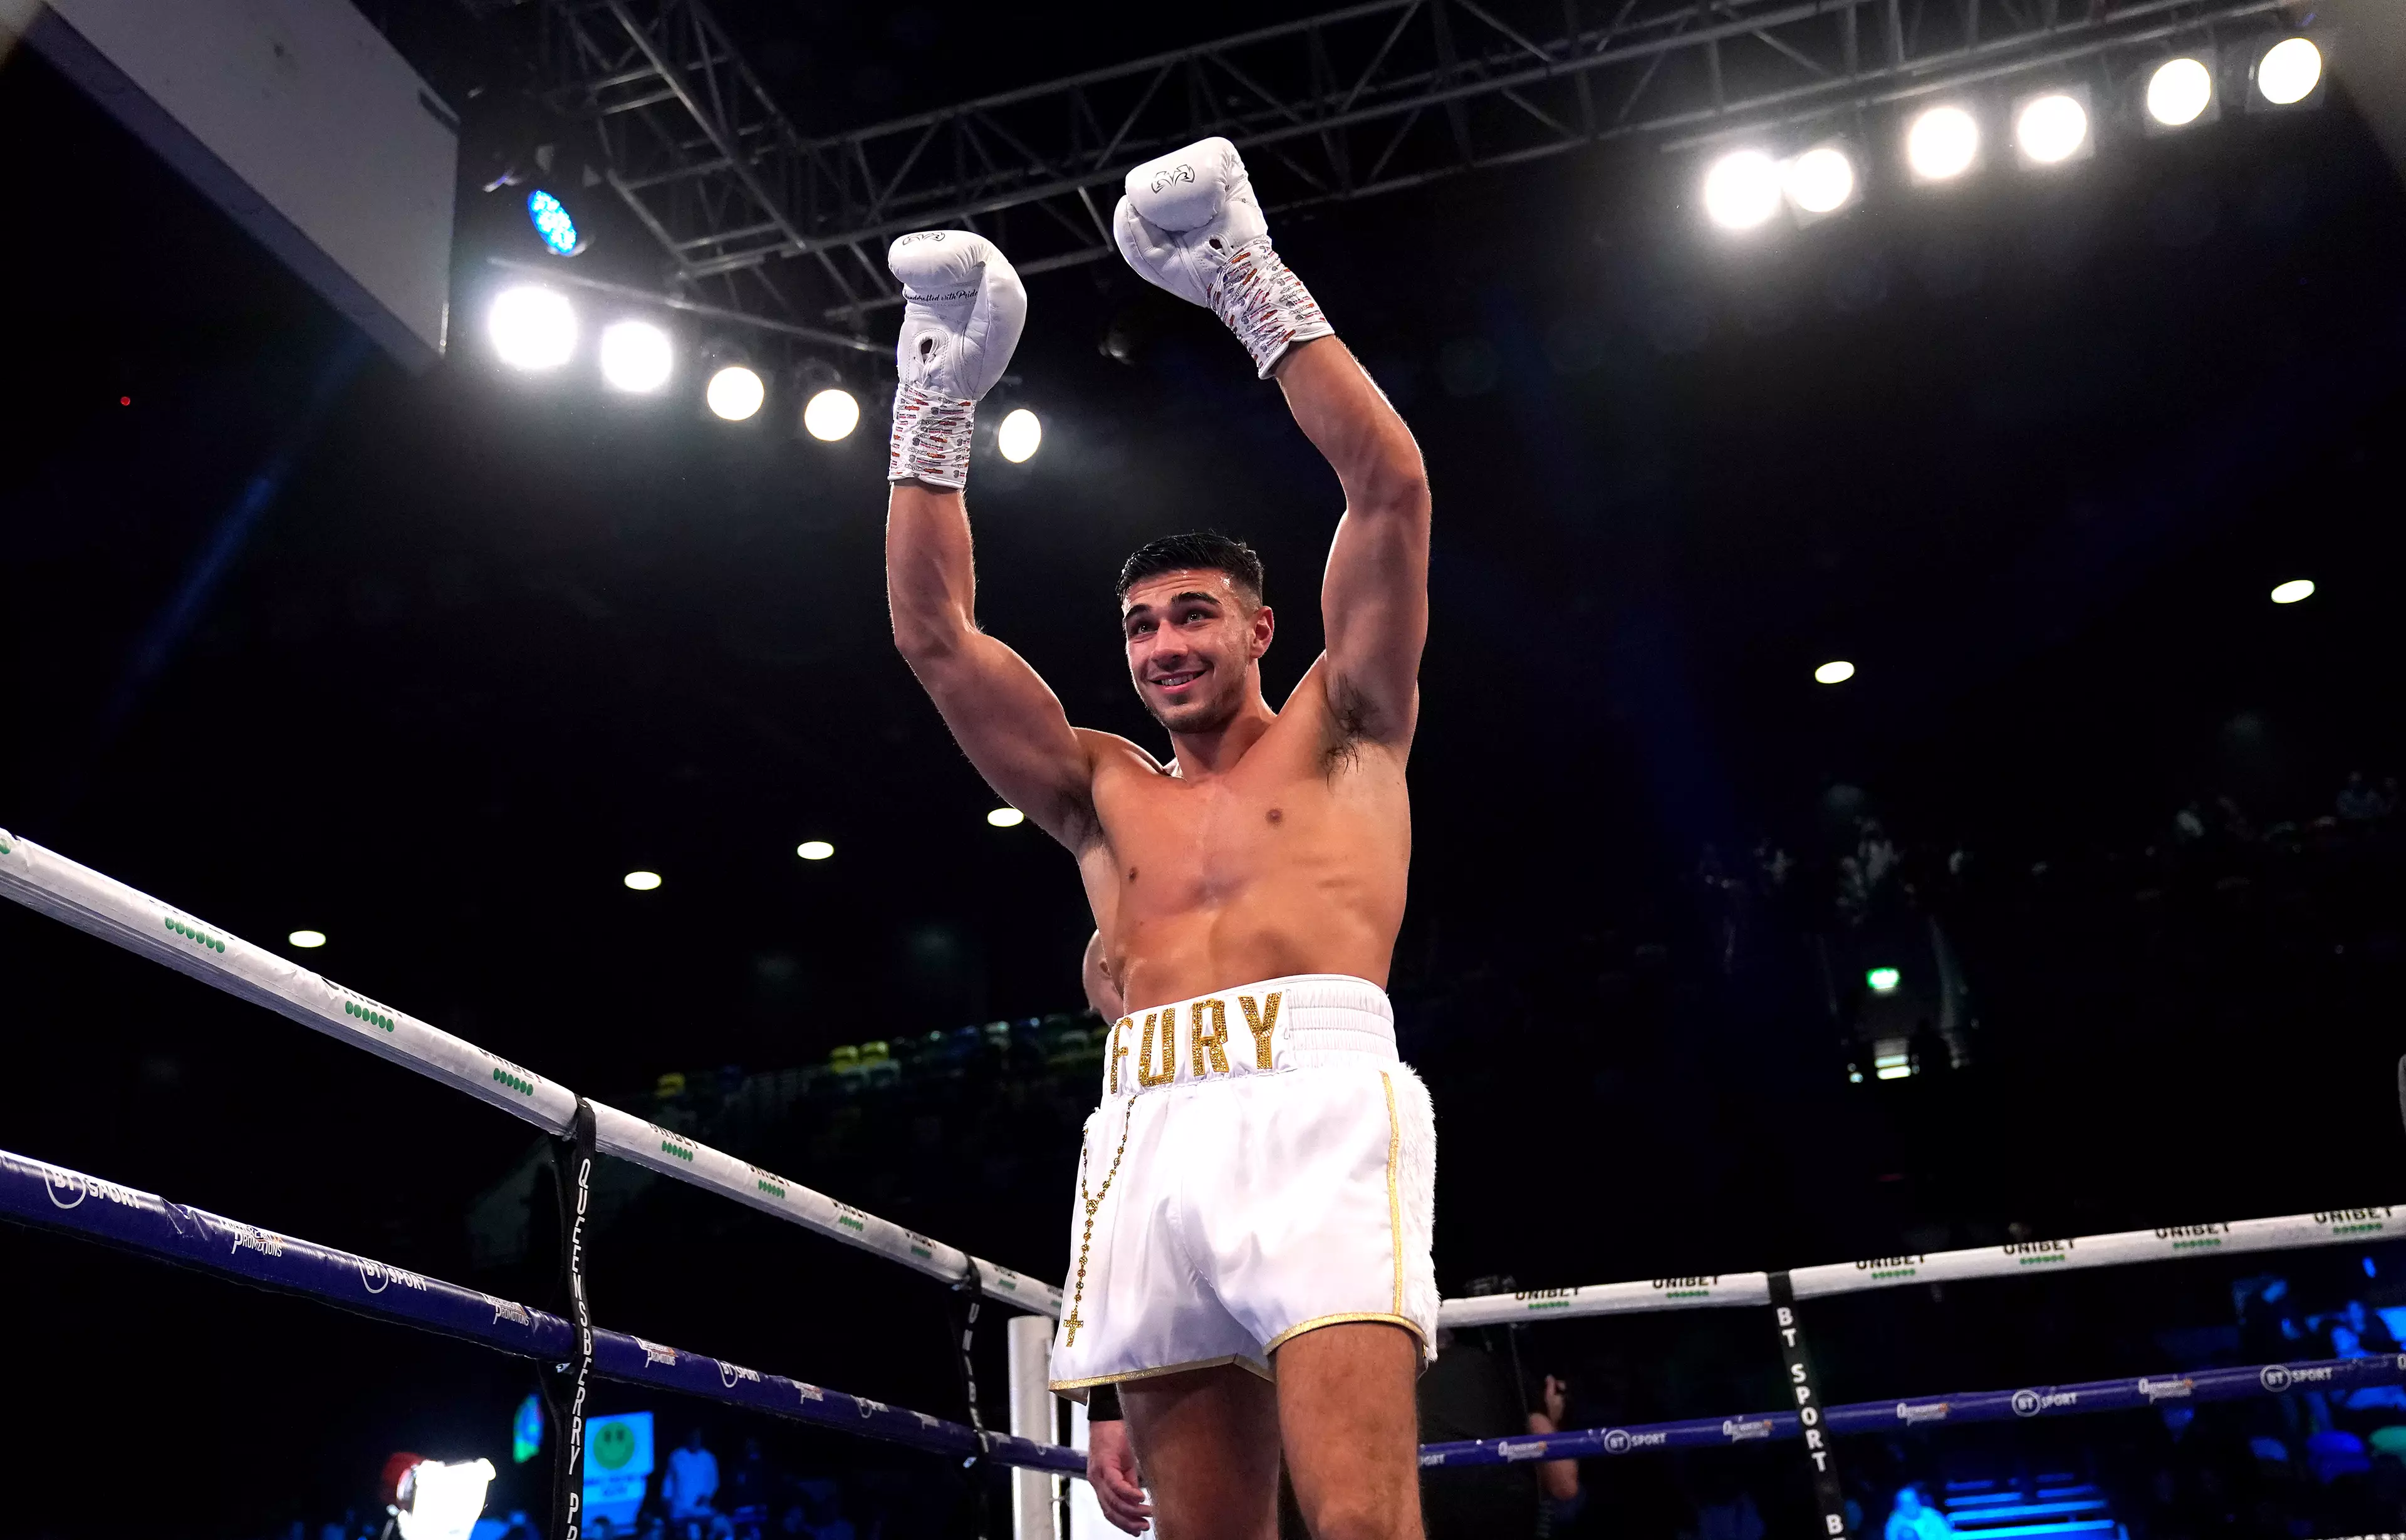 Tommy Fury has three wins from three fights in his own fledgling boxing career.